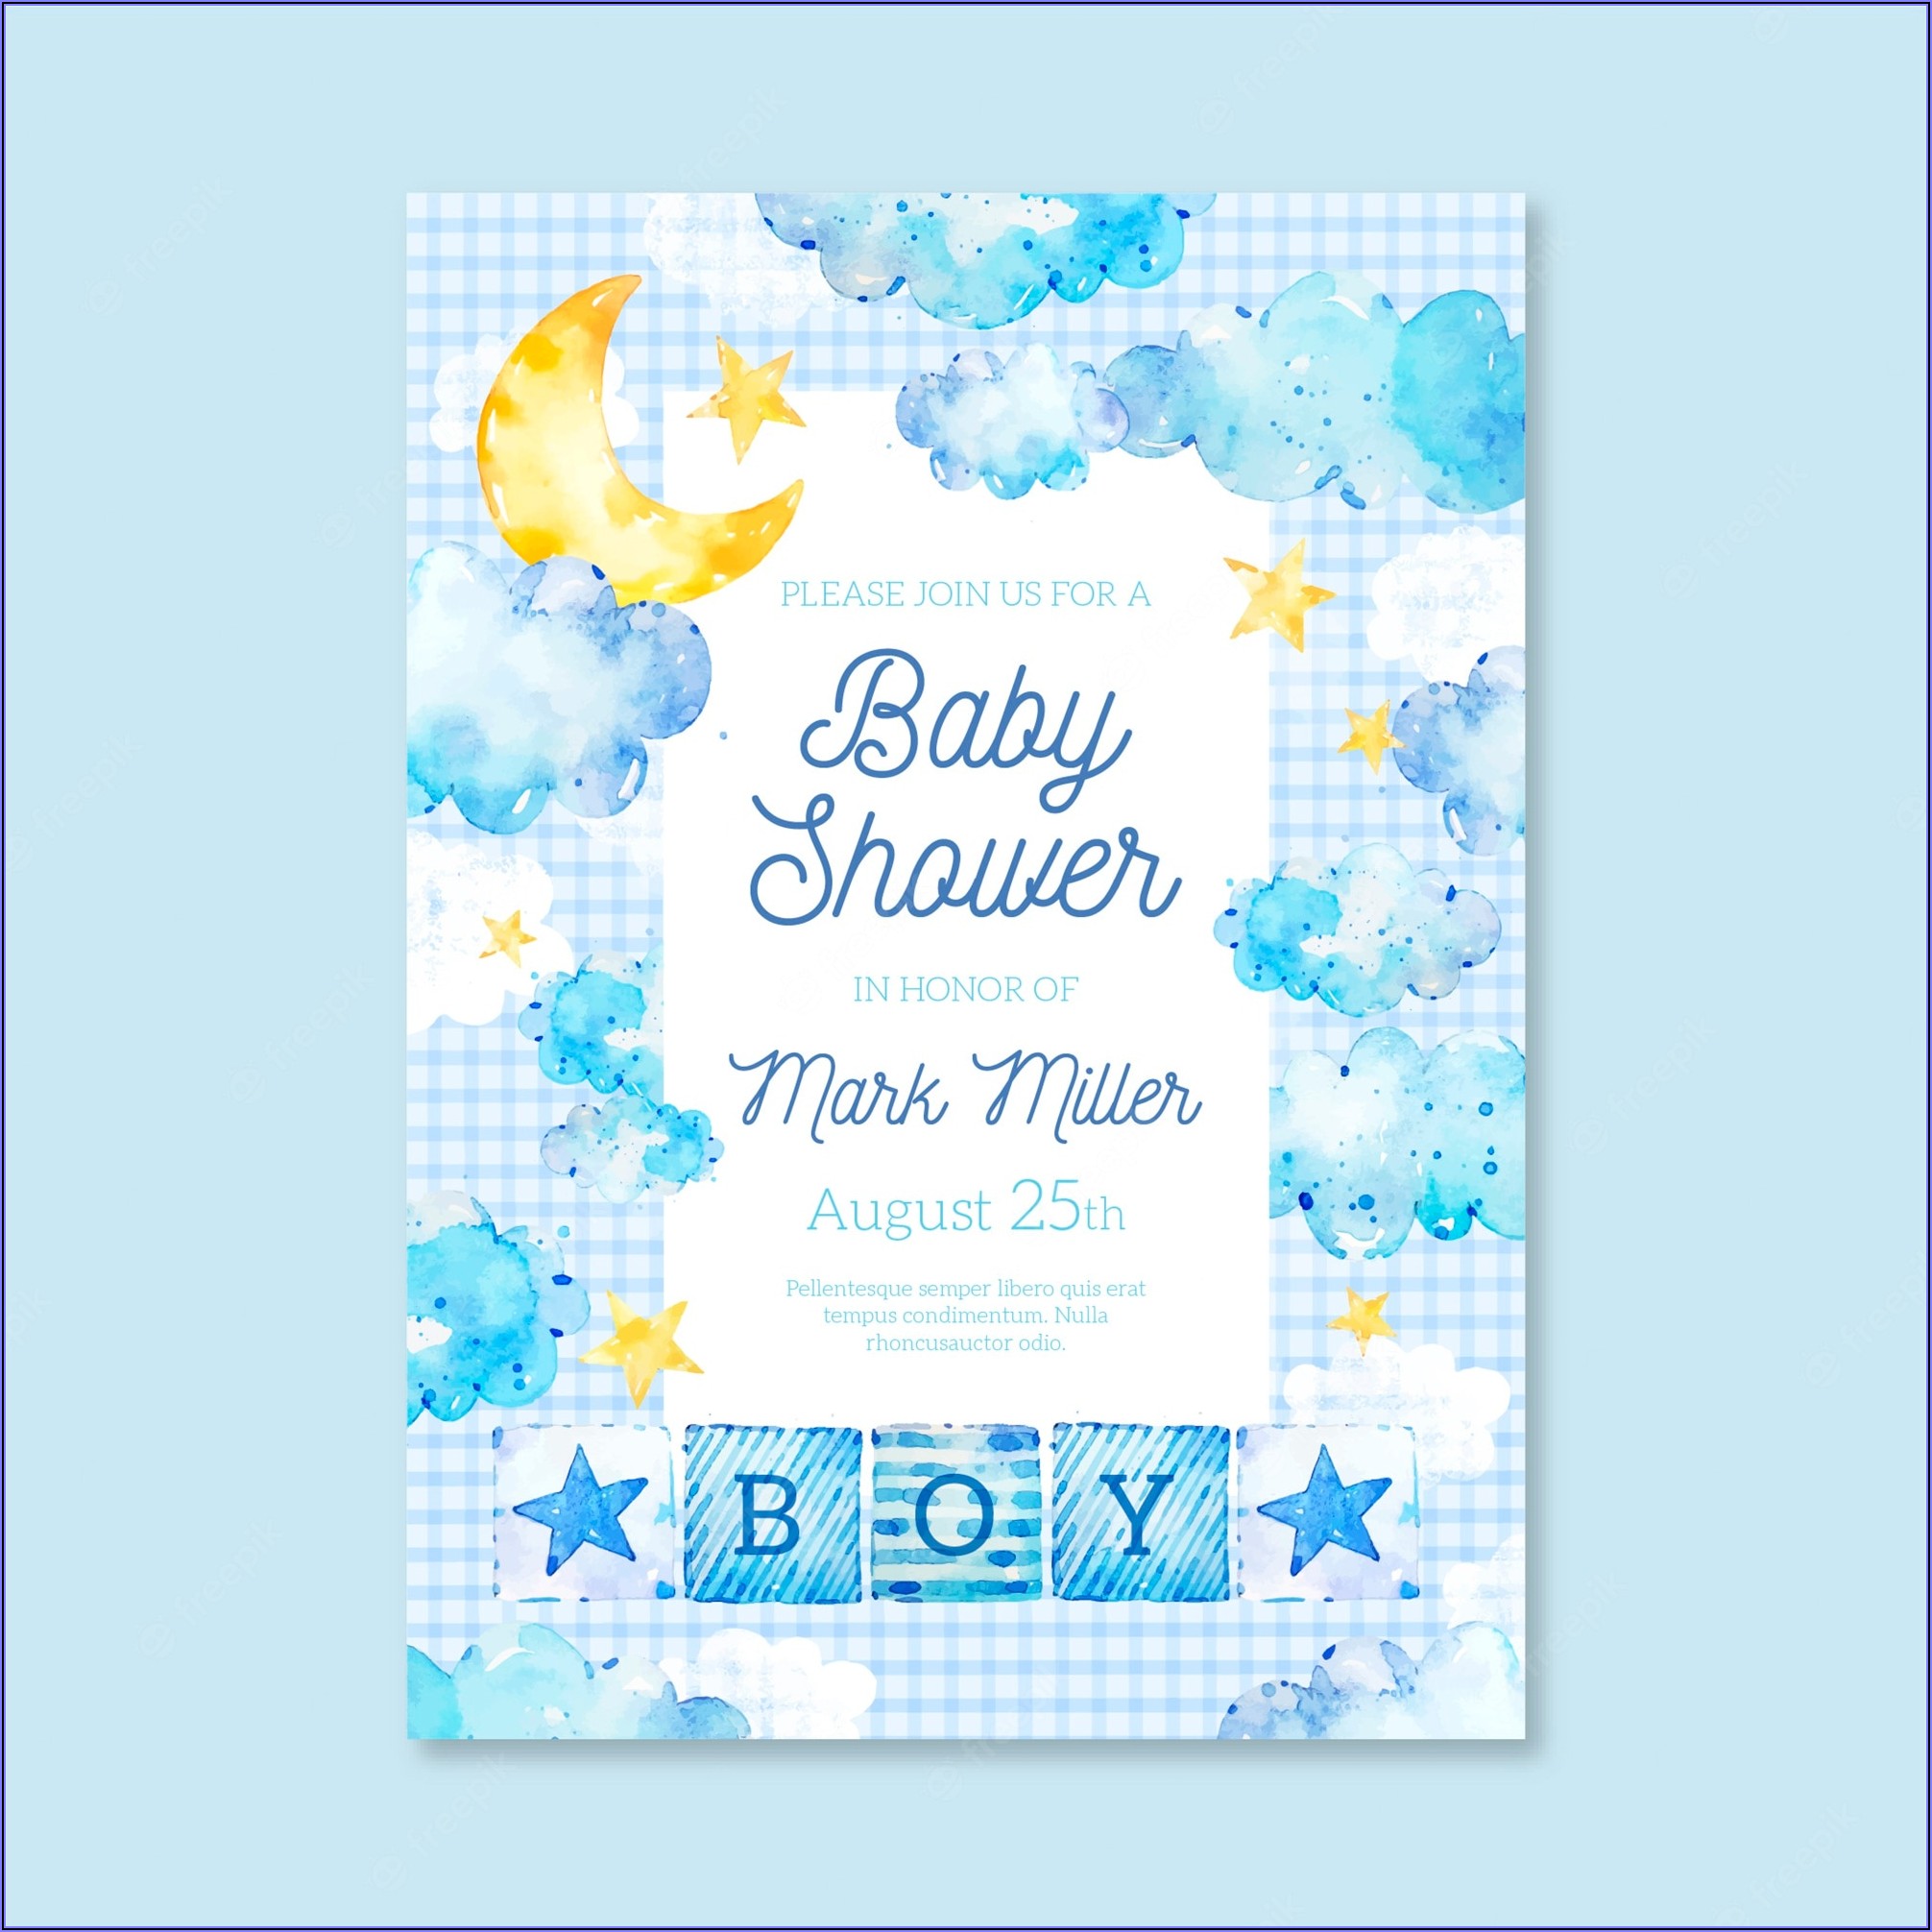 Free Baby Shower Invitation Template For Boy